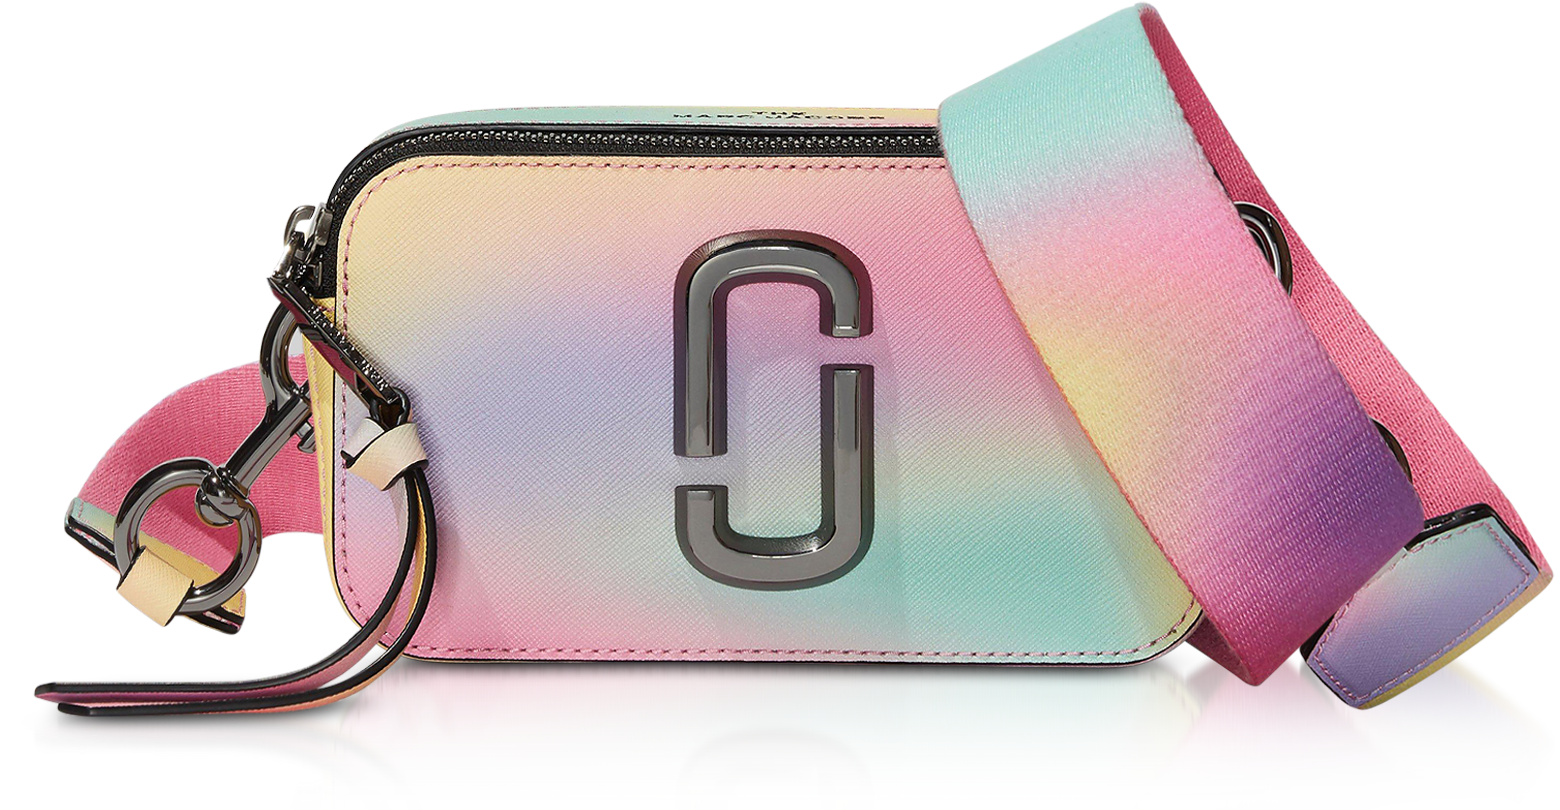 Marc Jacobs The Snapshot Airbrush White Saffiano Leather Crossbody Bag at  FORZIERI